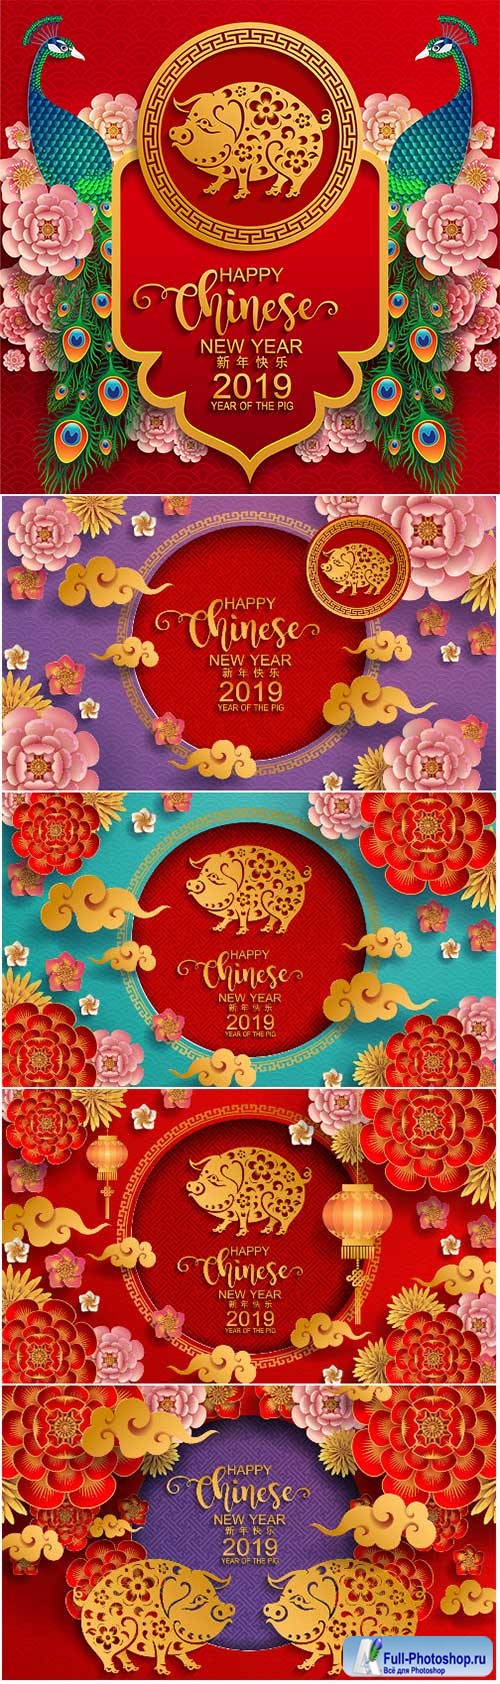 Pig year 2019 chinese vector card